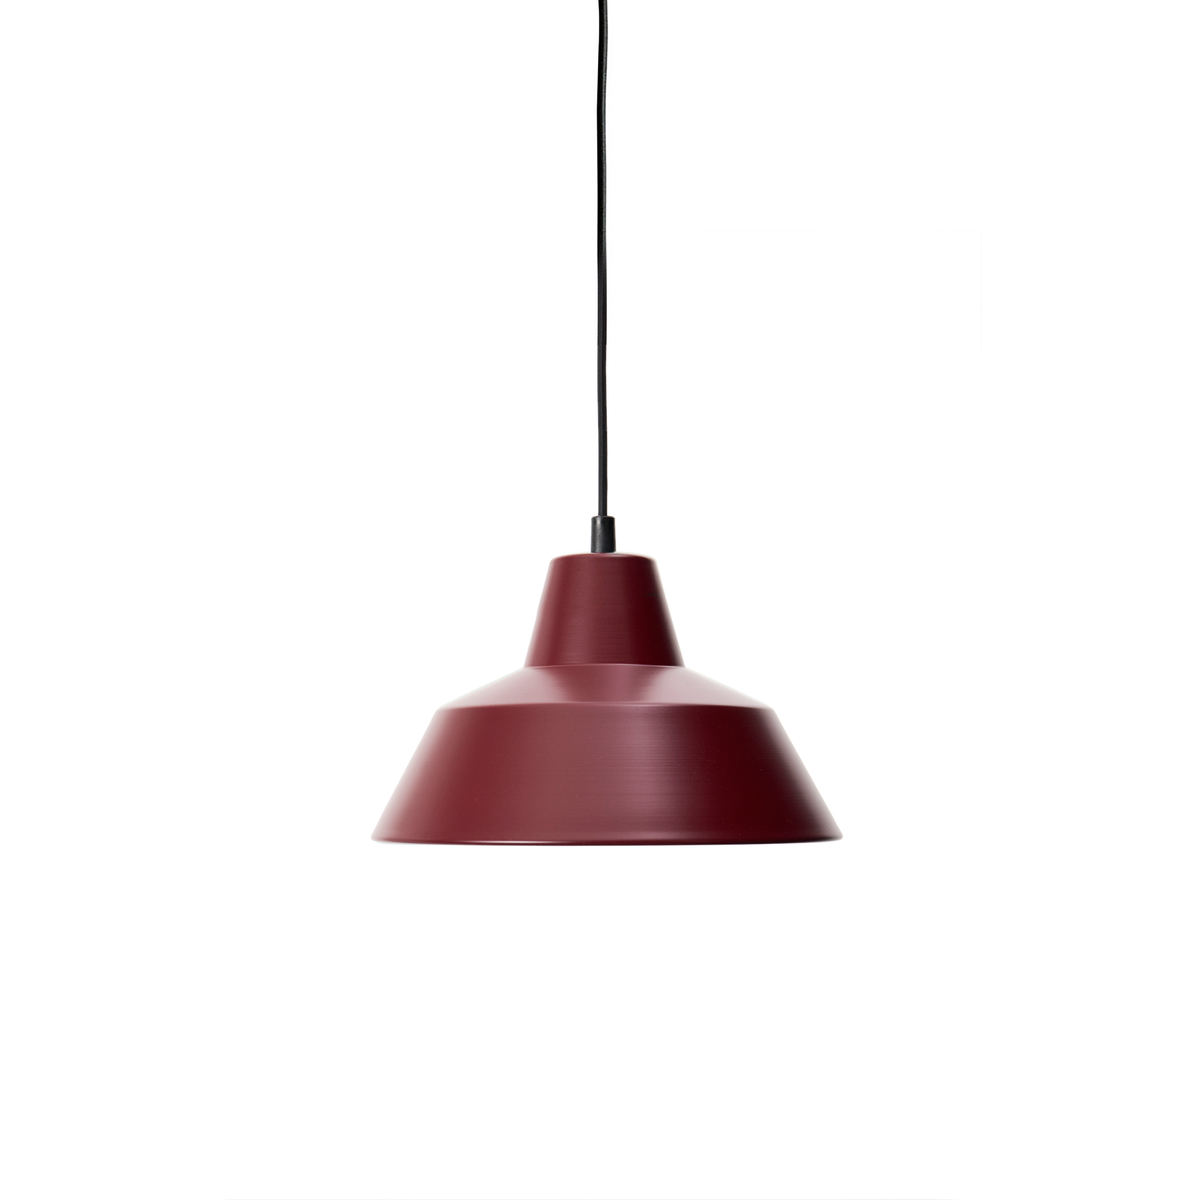 Made by Hand, Workshop Pendant Lamp W2, Wine Red, Pendant,